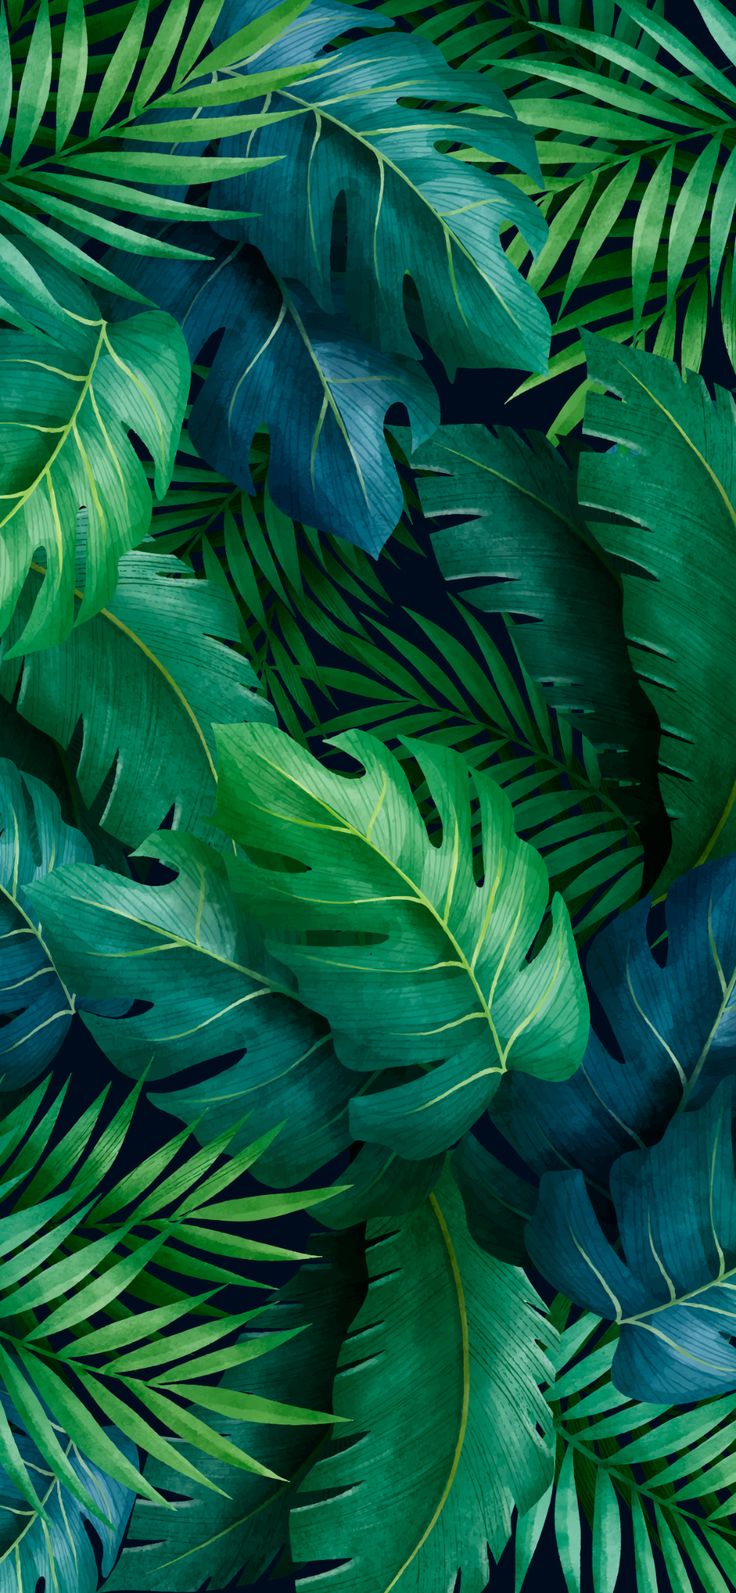 Wallpaper iphone green leaves. WallpaperiZe Wallpaper. Green leaf wallpaper, Leaves wallpaper iphone, iPhone wallpaper tropical